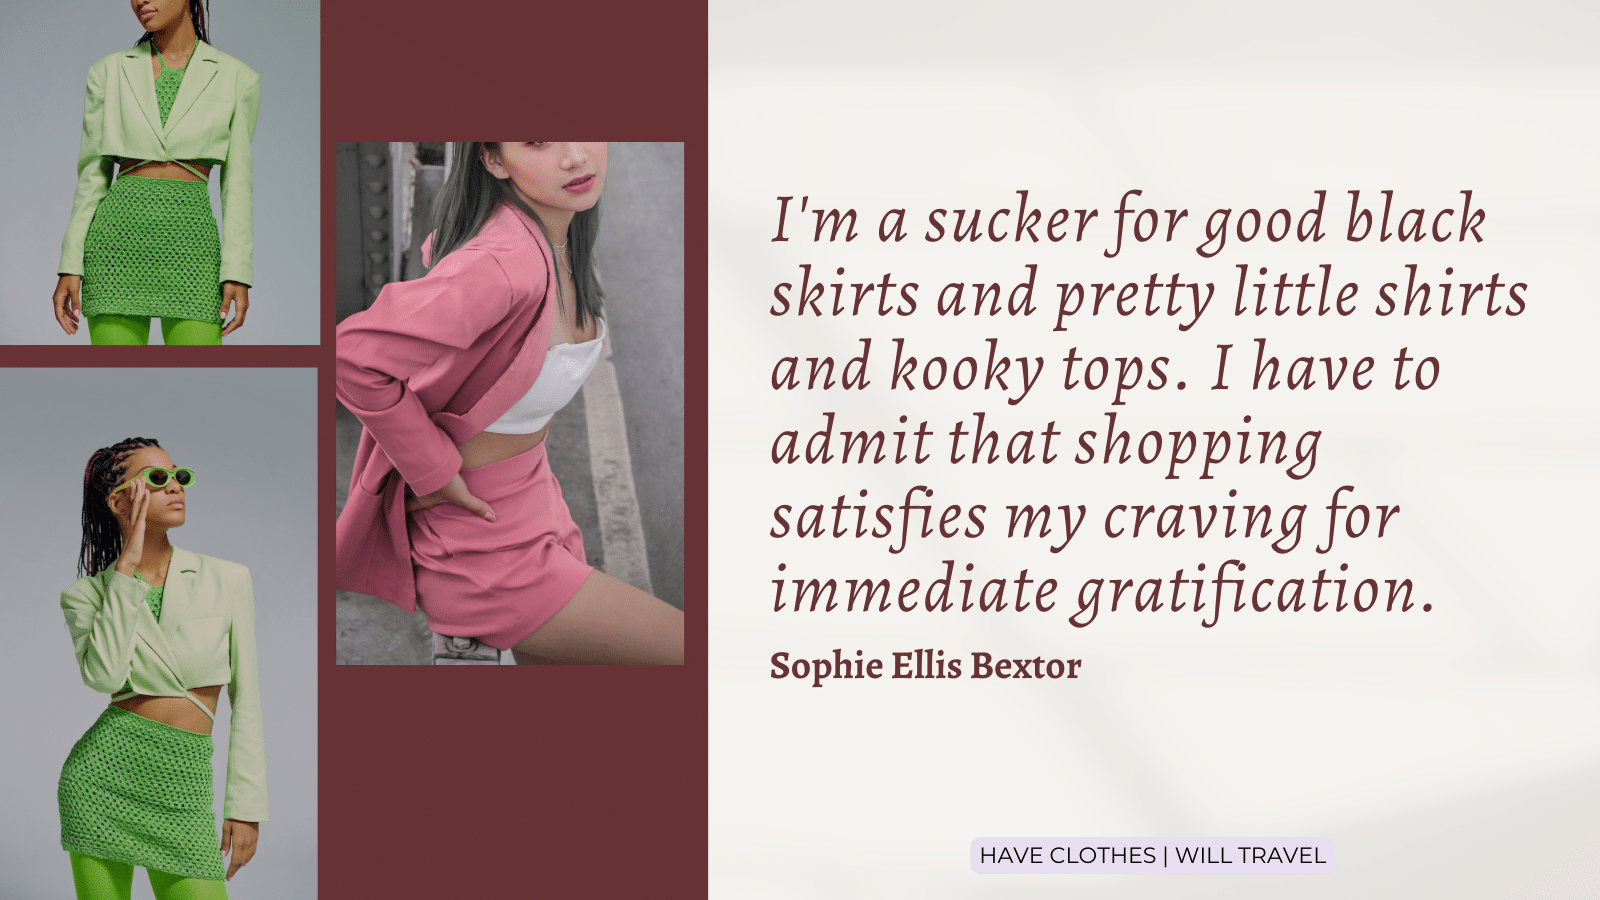 41. I'm a sucker for good black skirts and pretty little shirts and kooky tops. I have to admit that shopping satisfies my craving for immediate gratification. — Sophie Ellis Bextor